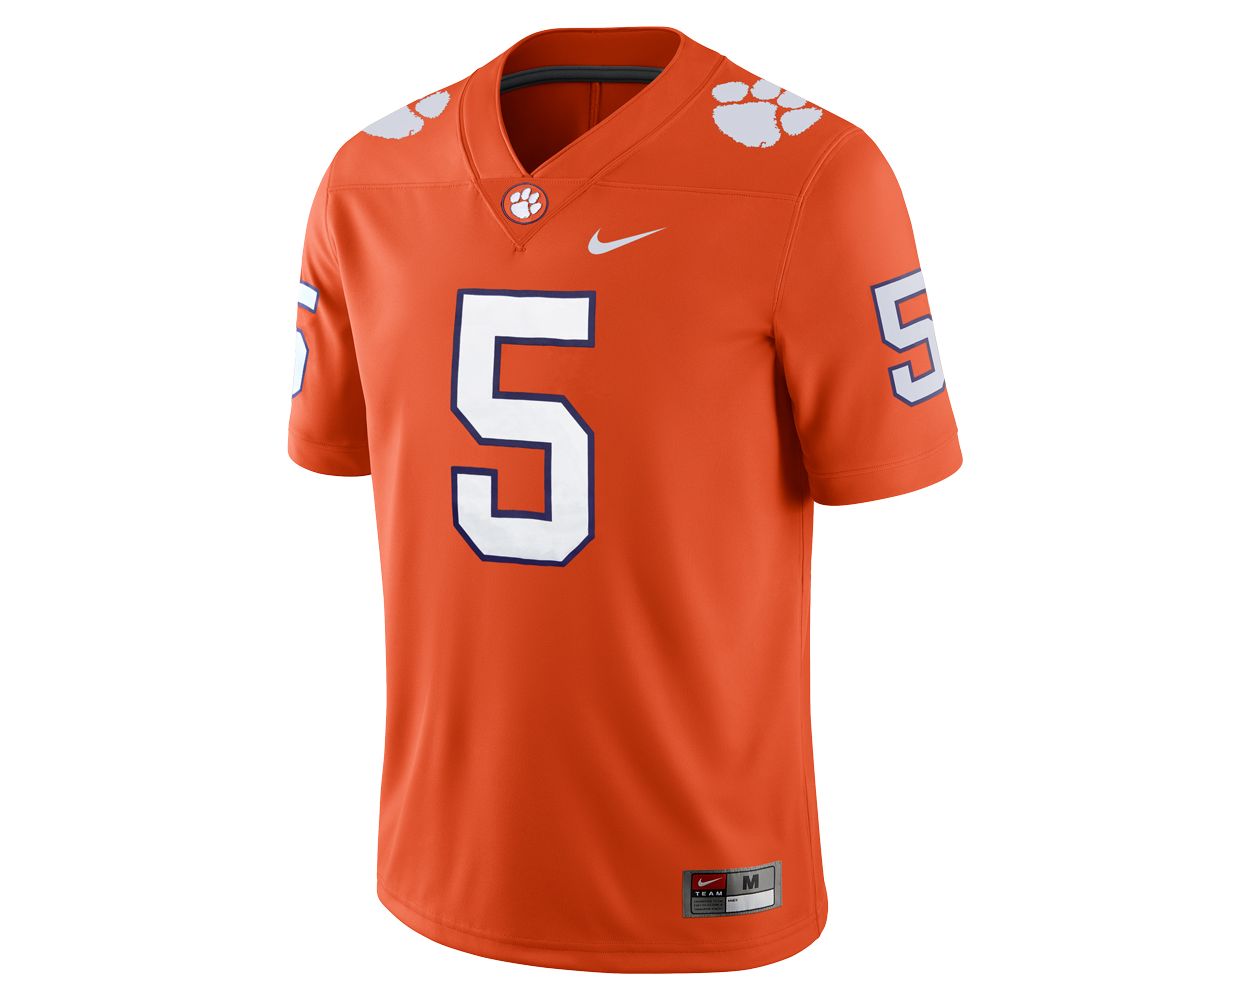 Nike Team Youth Wordmark Full Button Jersey